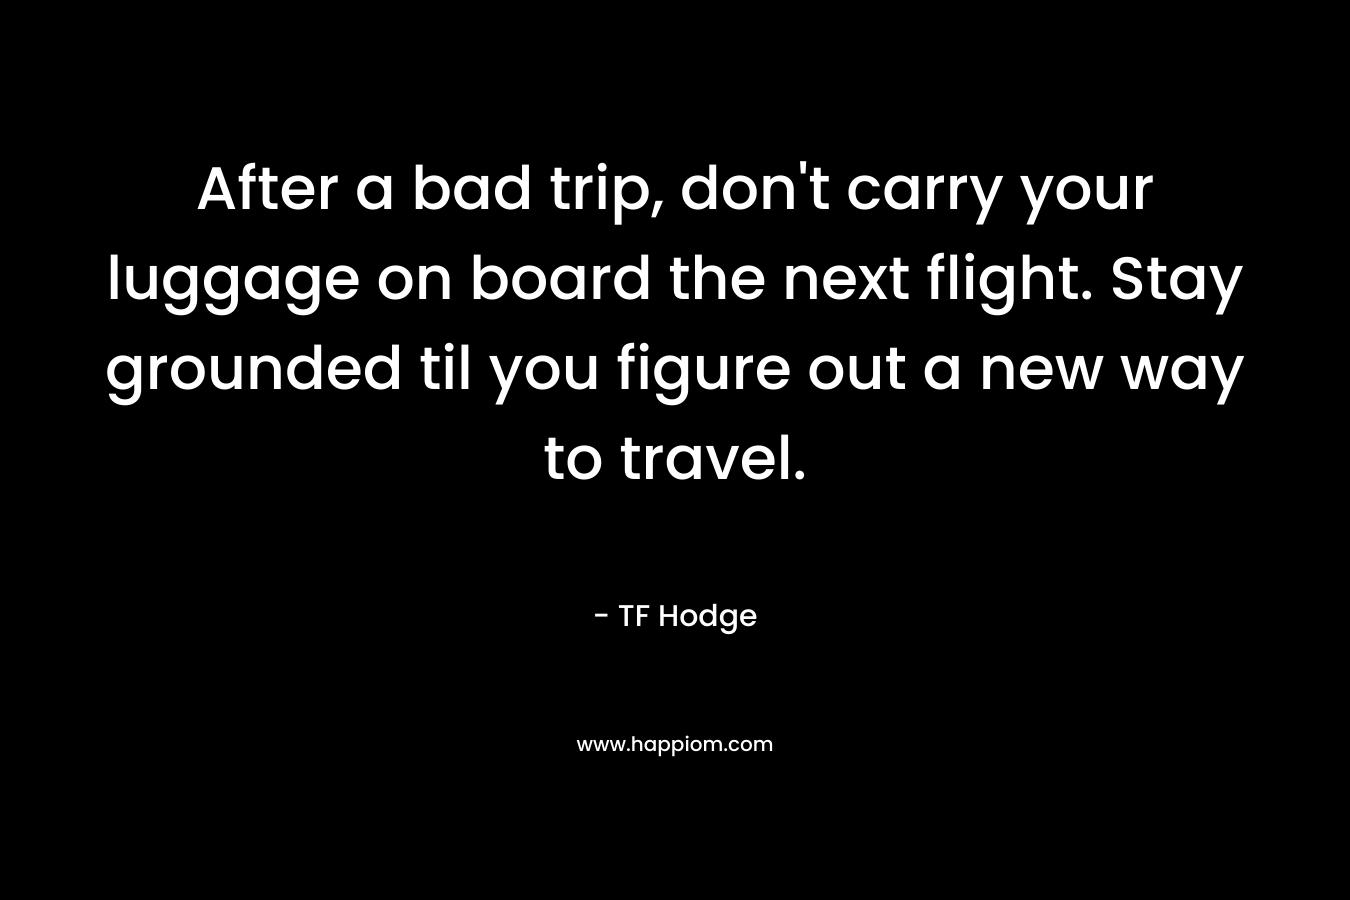 After a bad trip, don’t carry your luggage on board the next flight. Stay grounded til you figure out a new way to travel. – TF Hodge